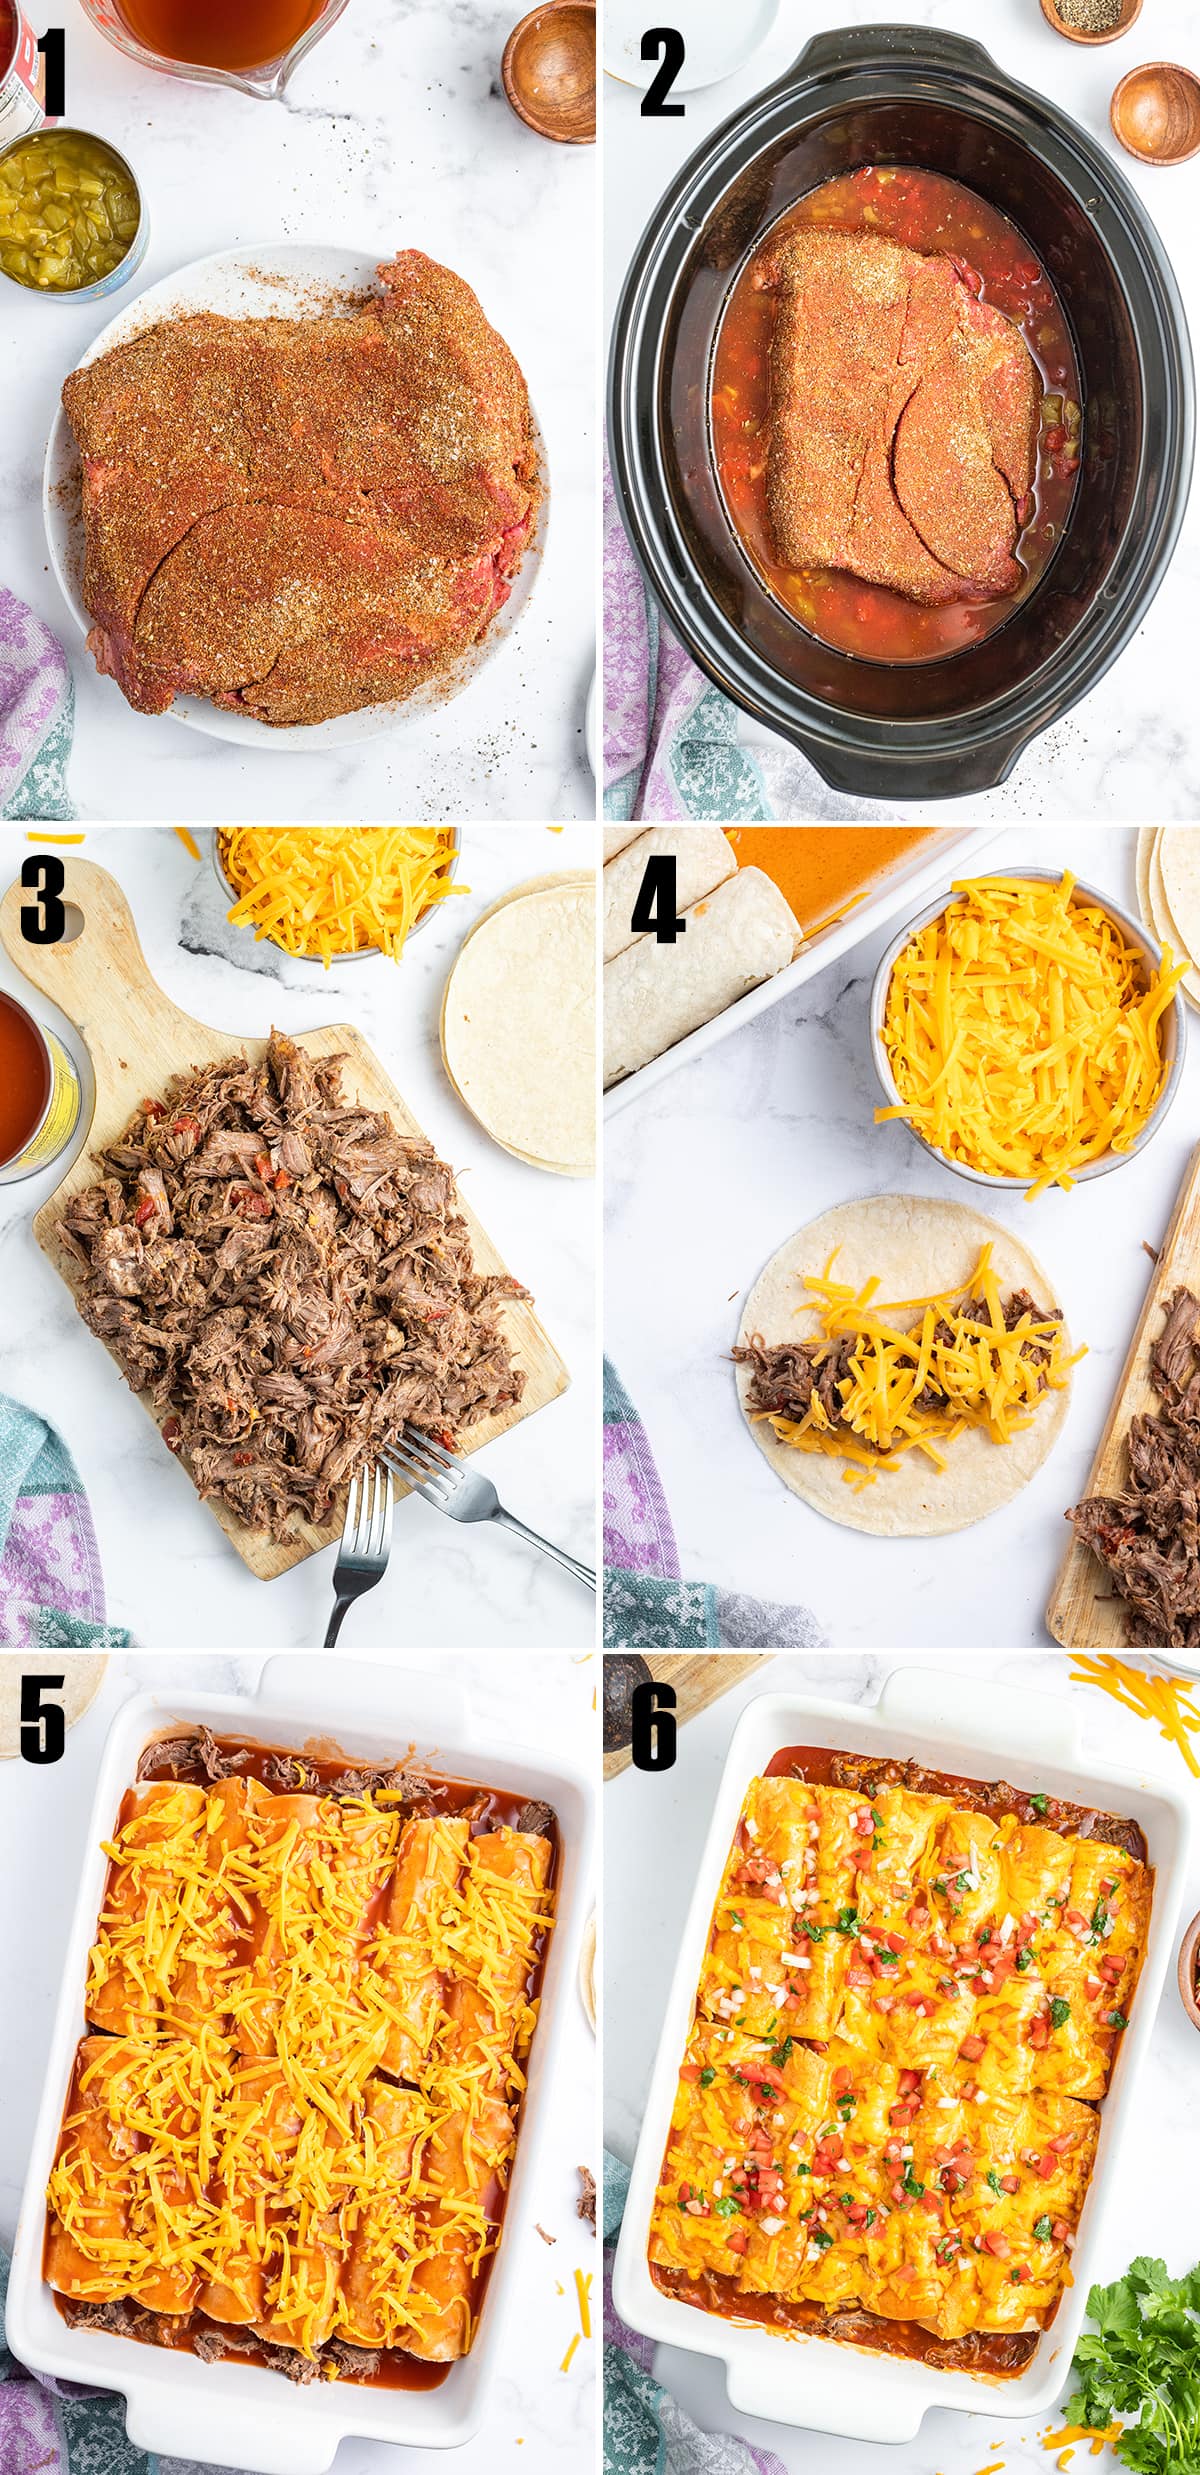 A collage of 6 photos showing how to make shredded beef enchiladas. 